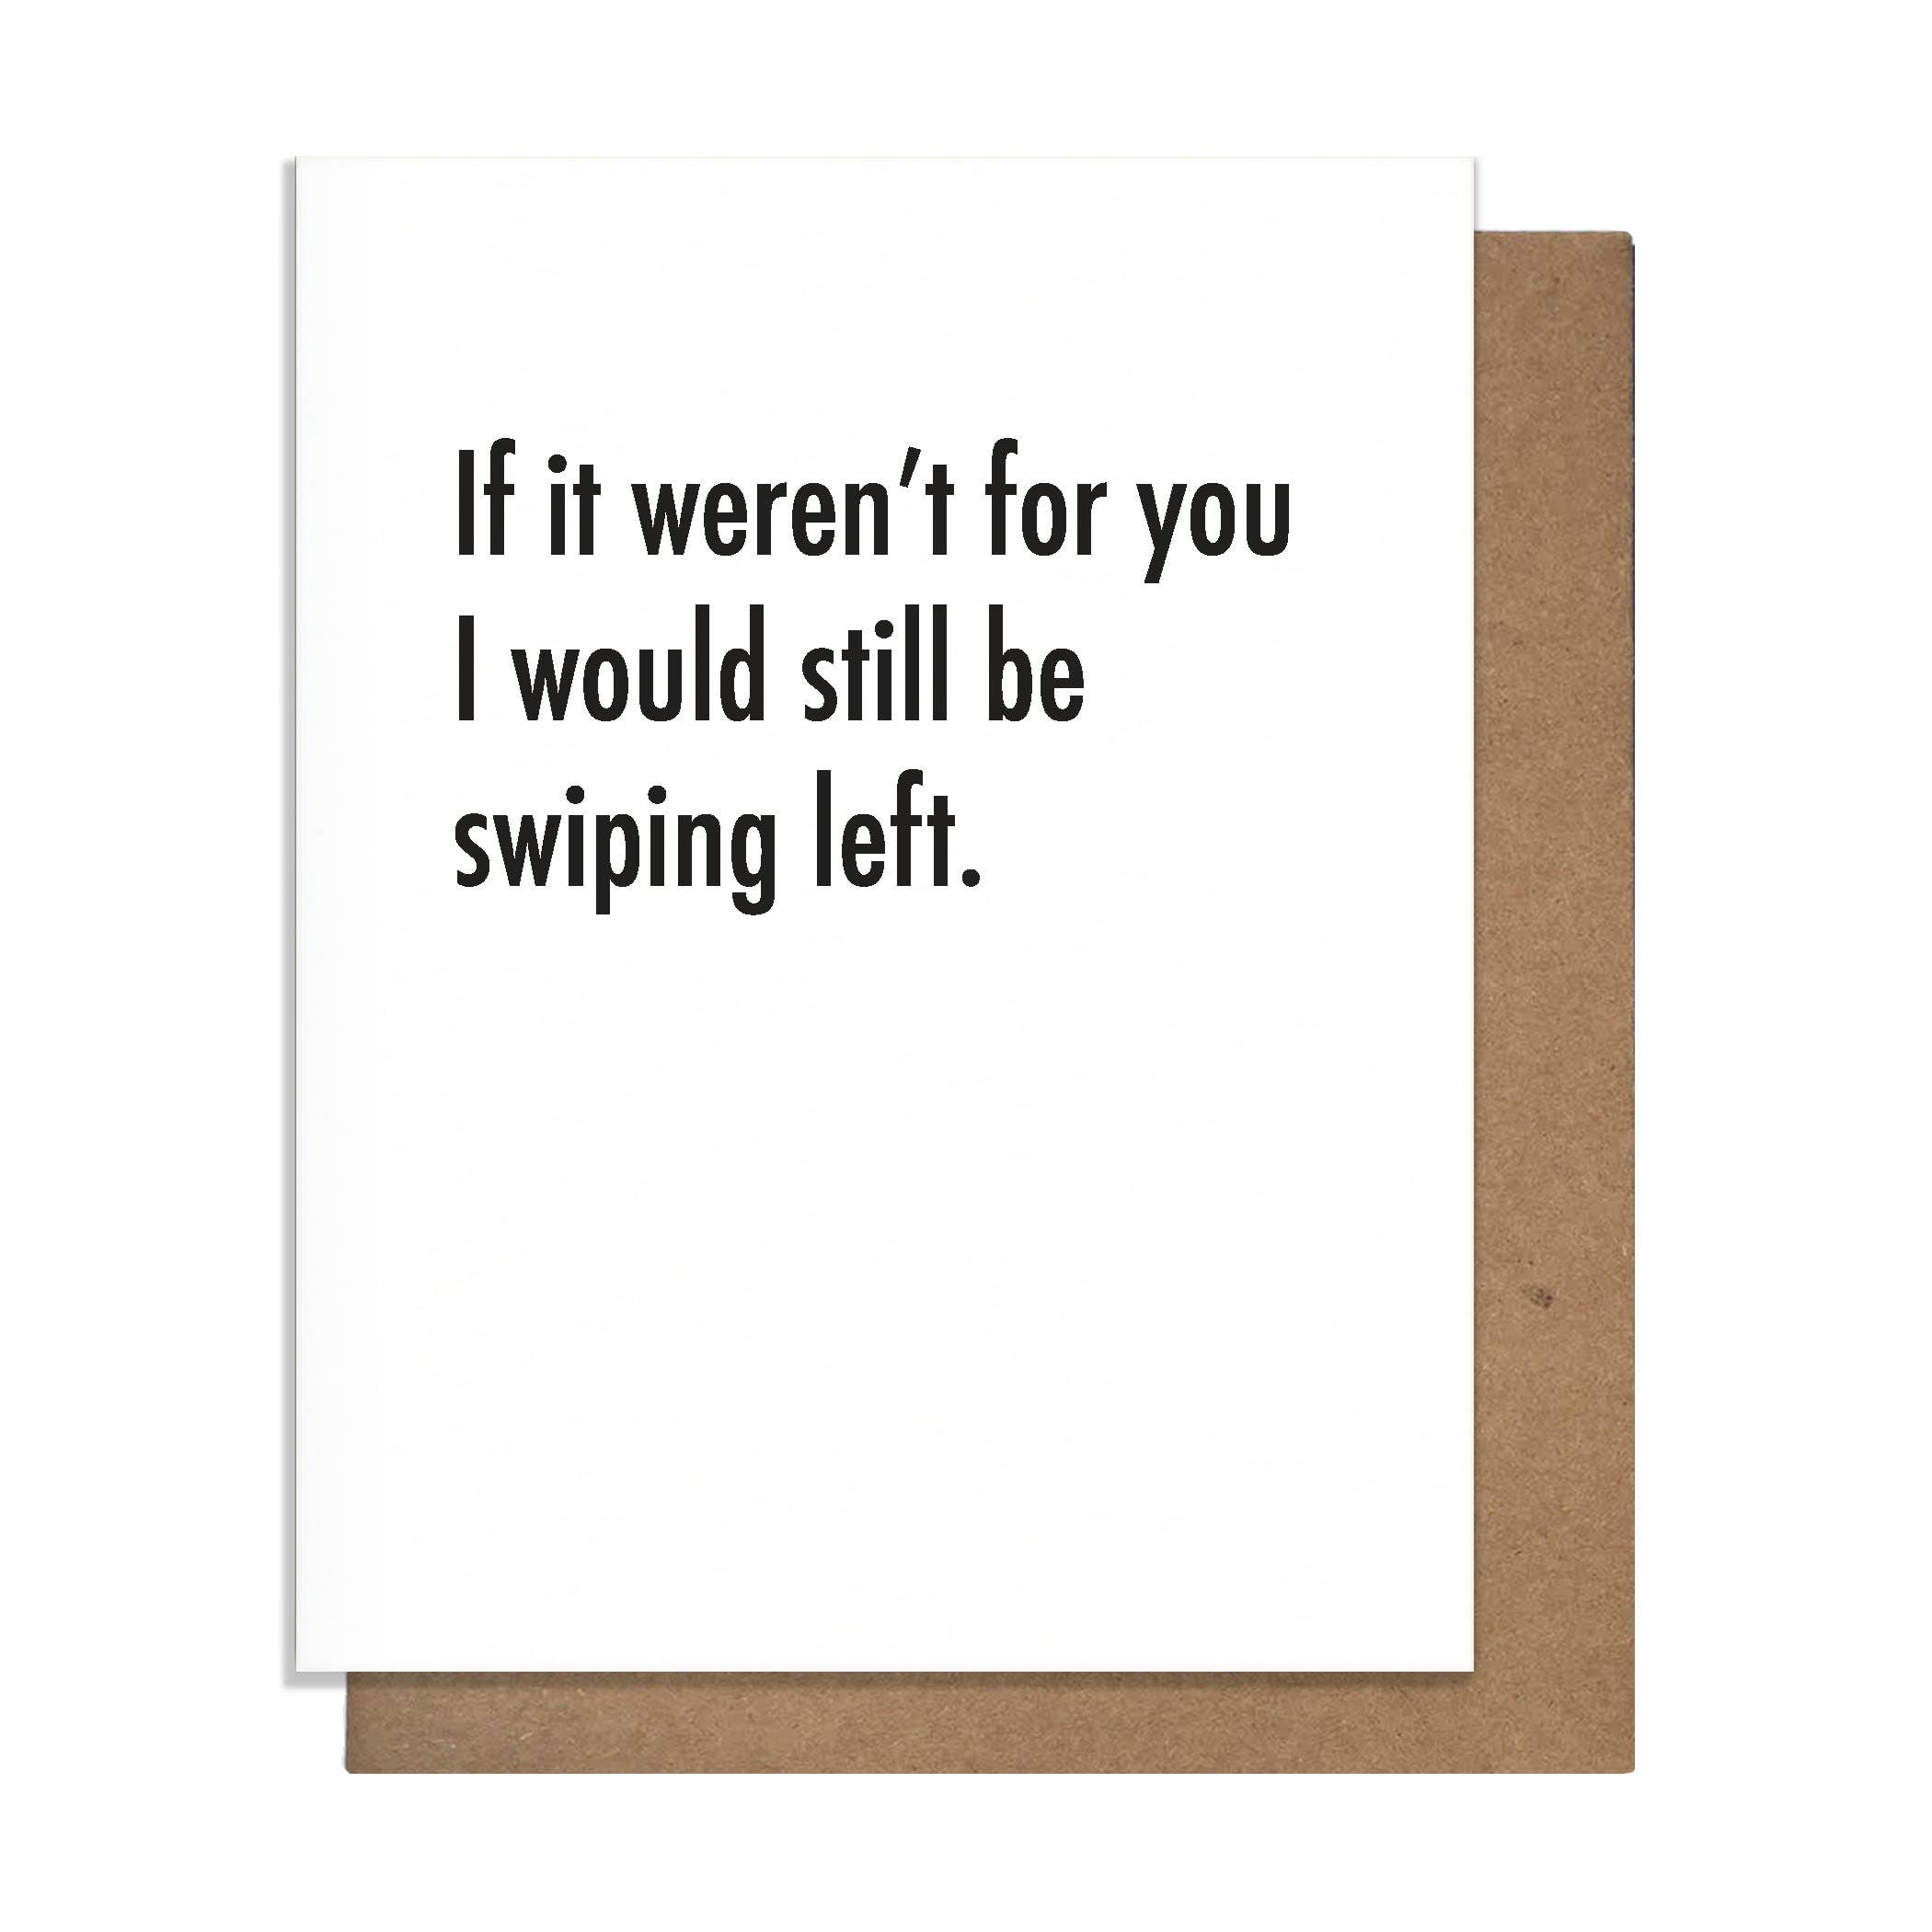 Pretty Alright Goods - Tinder Swiping Love Card